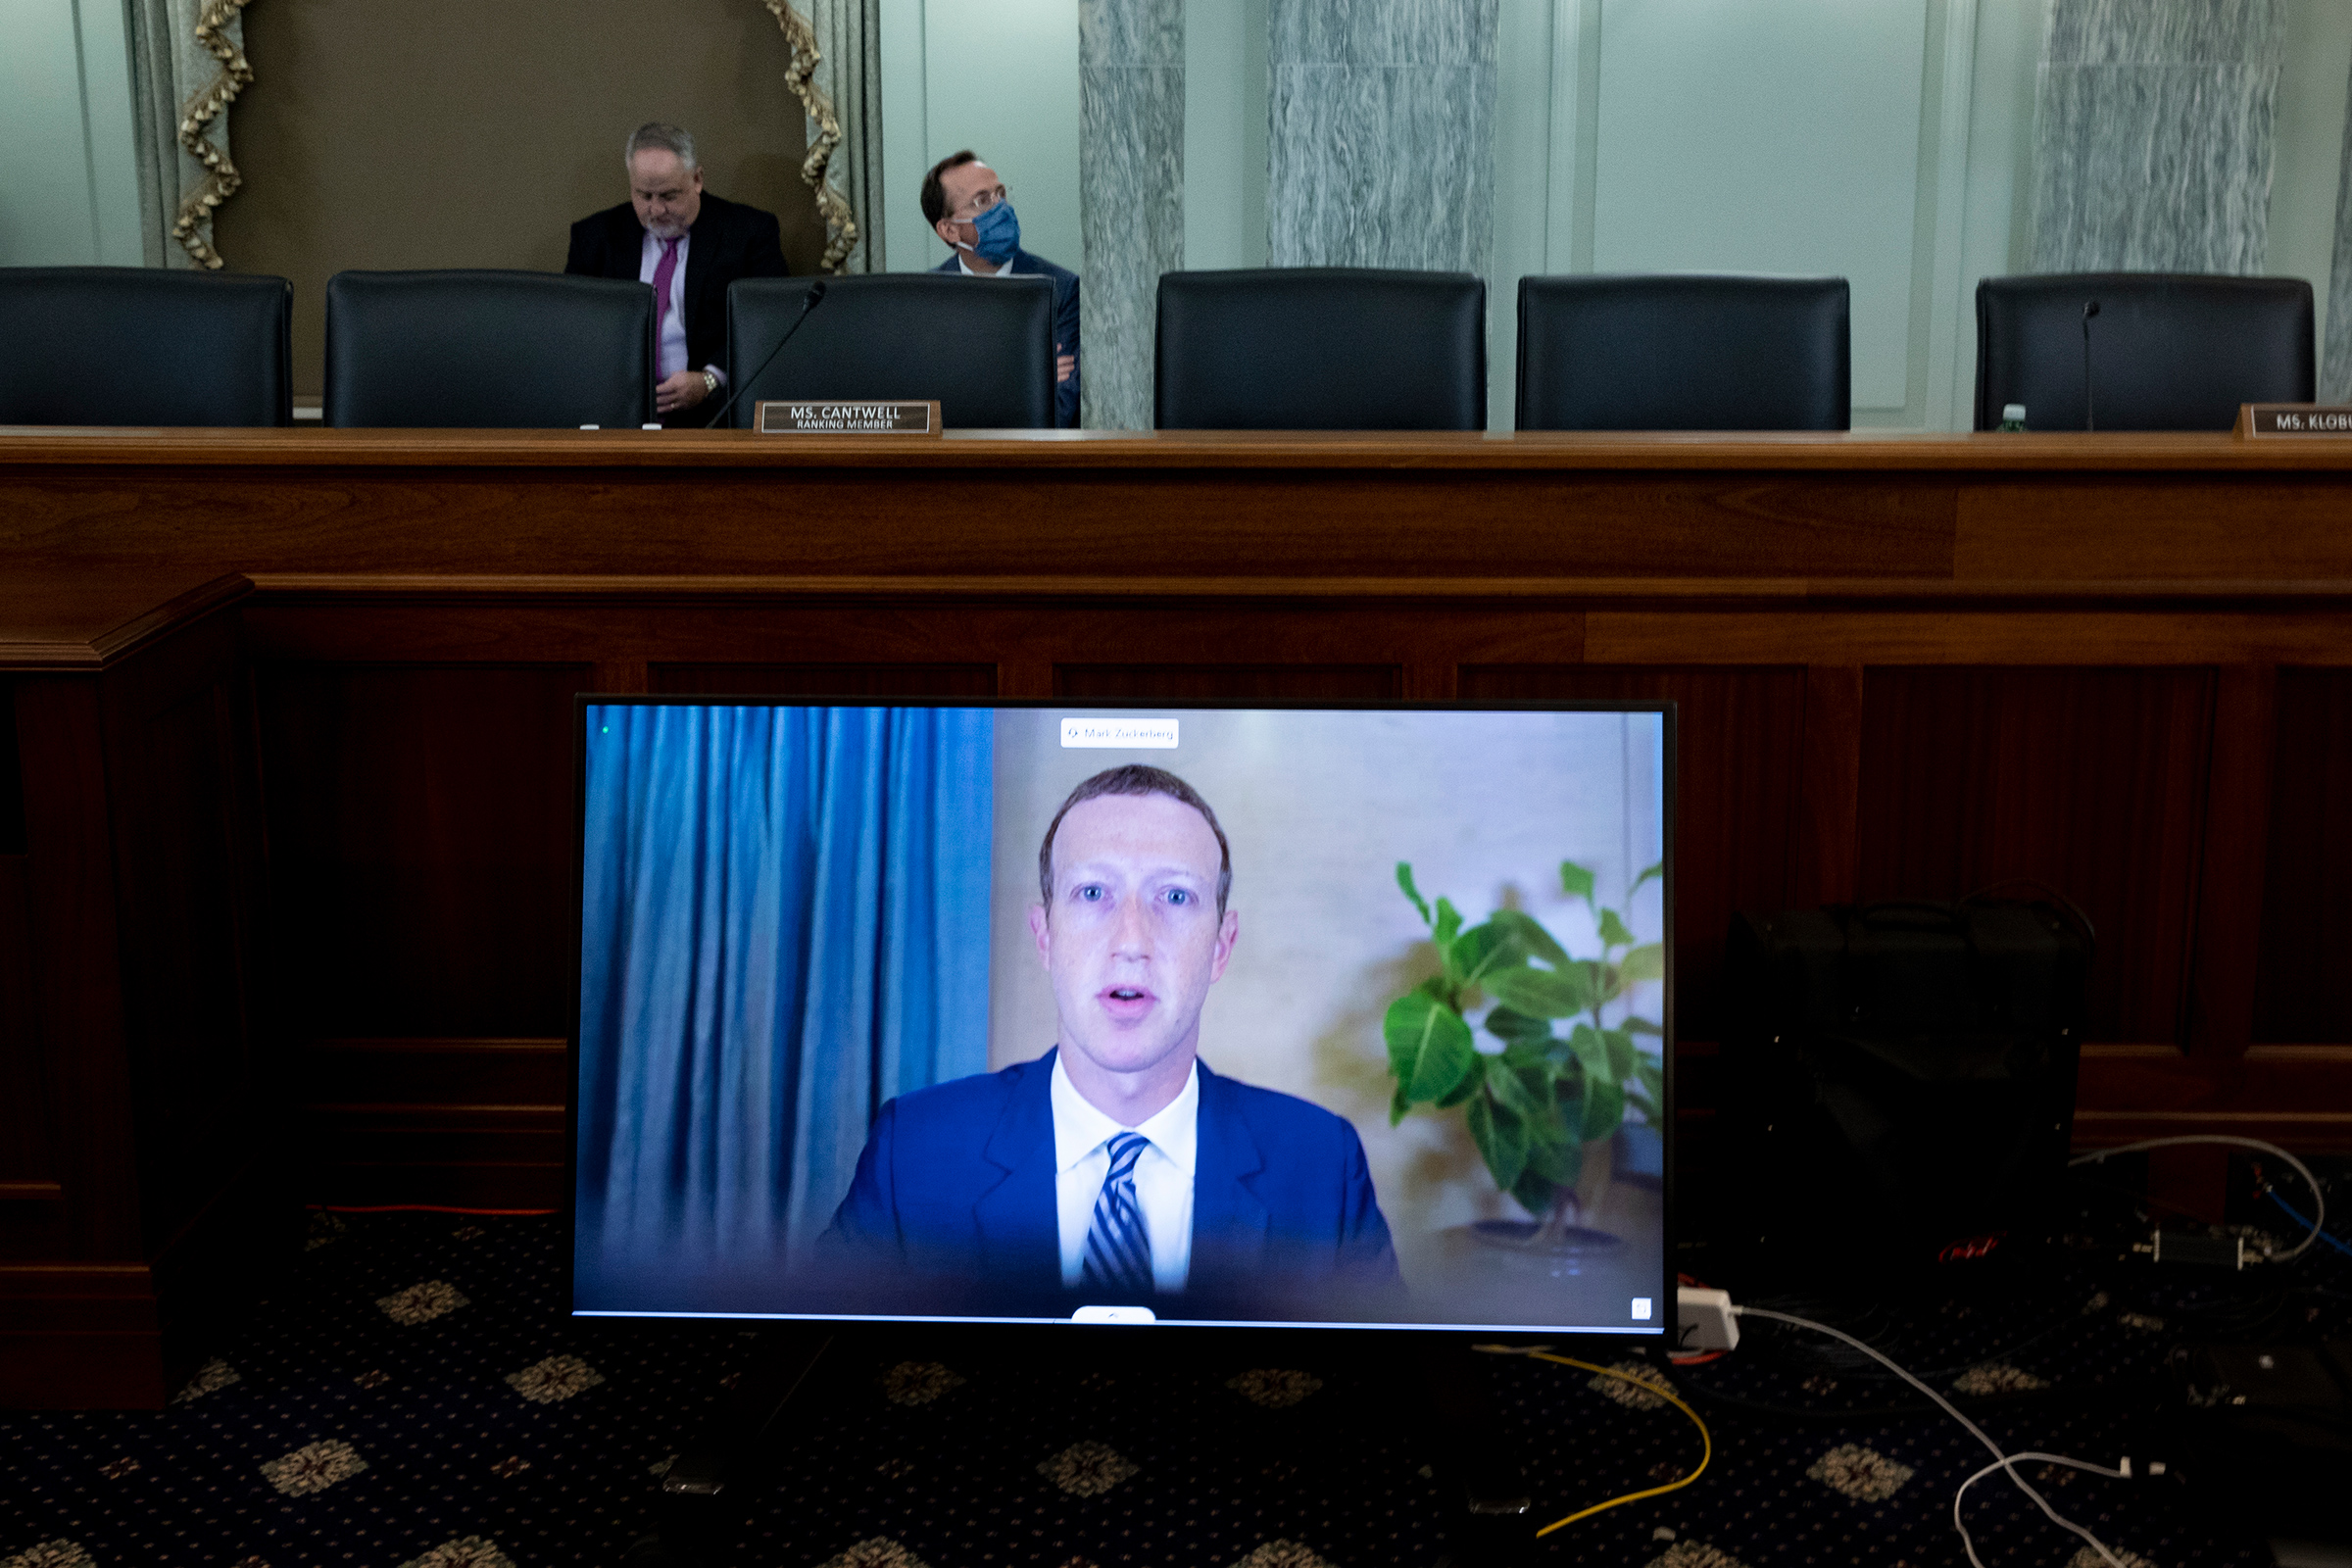 Mark Zuckerberg, founder and CEO of Facebook, testifying remotely during a Senate hearing on Section 230, on Oct. 28 (Michael Reynolds—Pool/Getty Images)